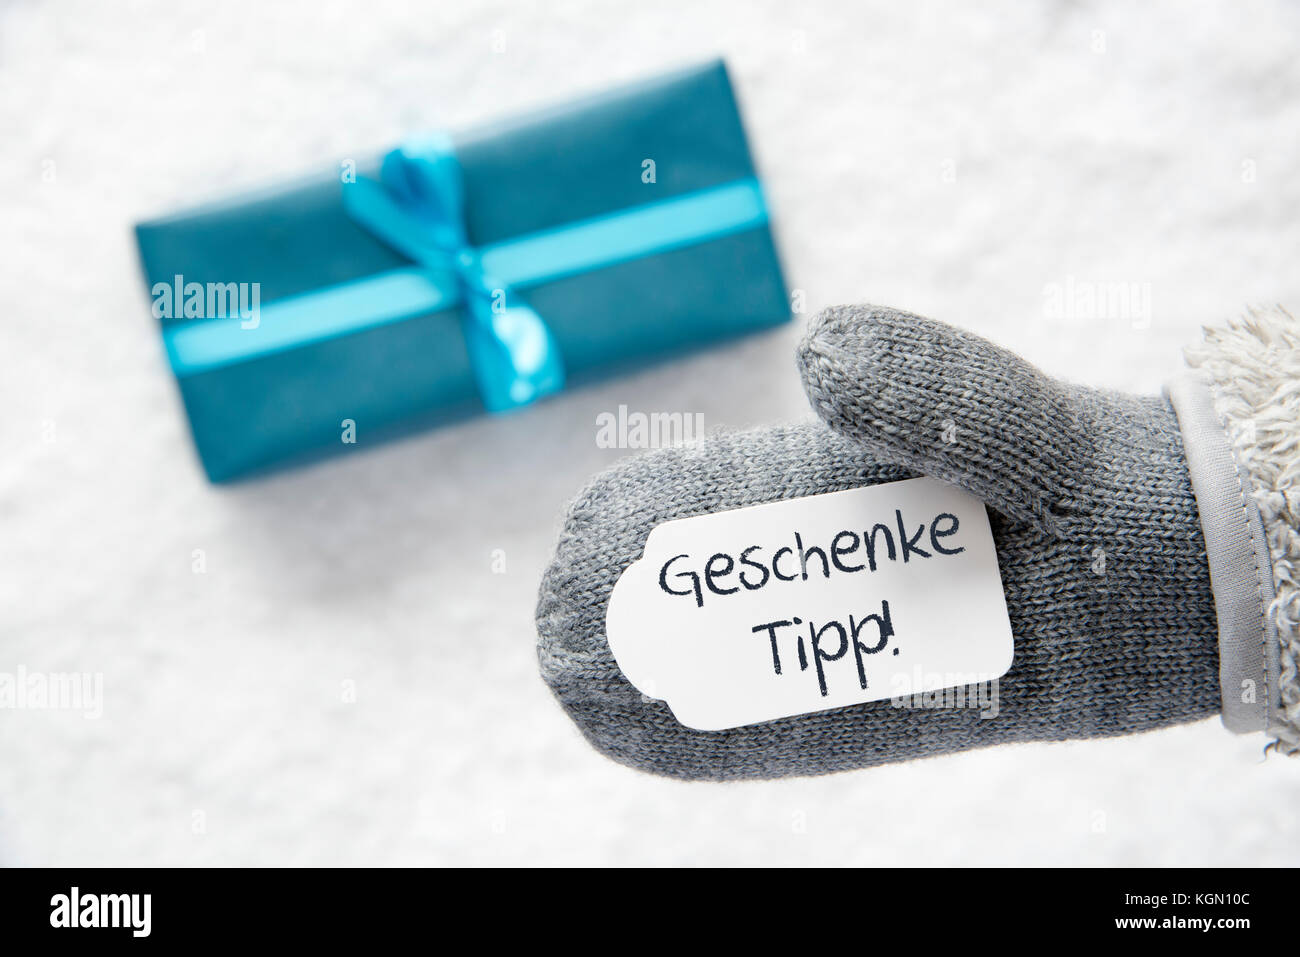 Turquoise Gift, Glove, Geschenke Tipp Means Gift Tip Stock Photo